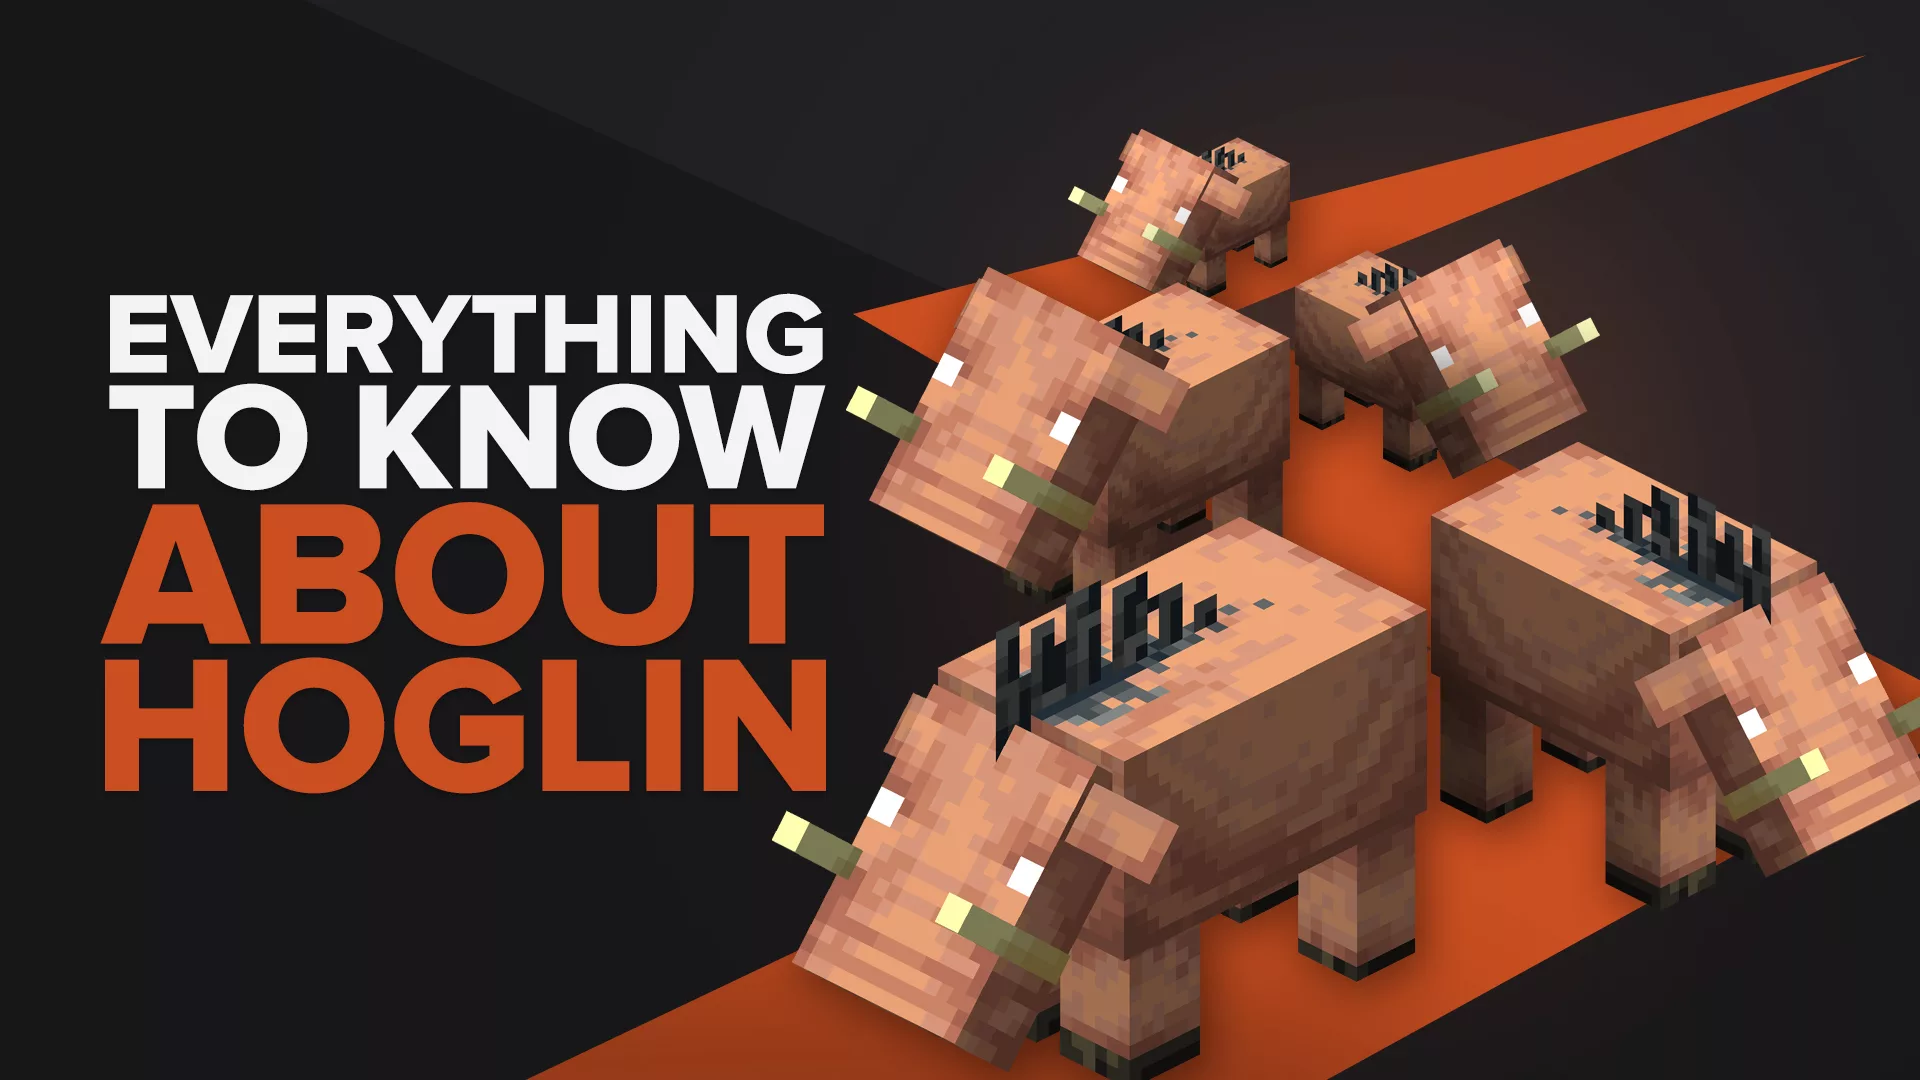 Everything You Need To Know About Hoglins